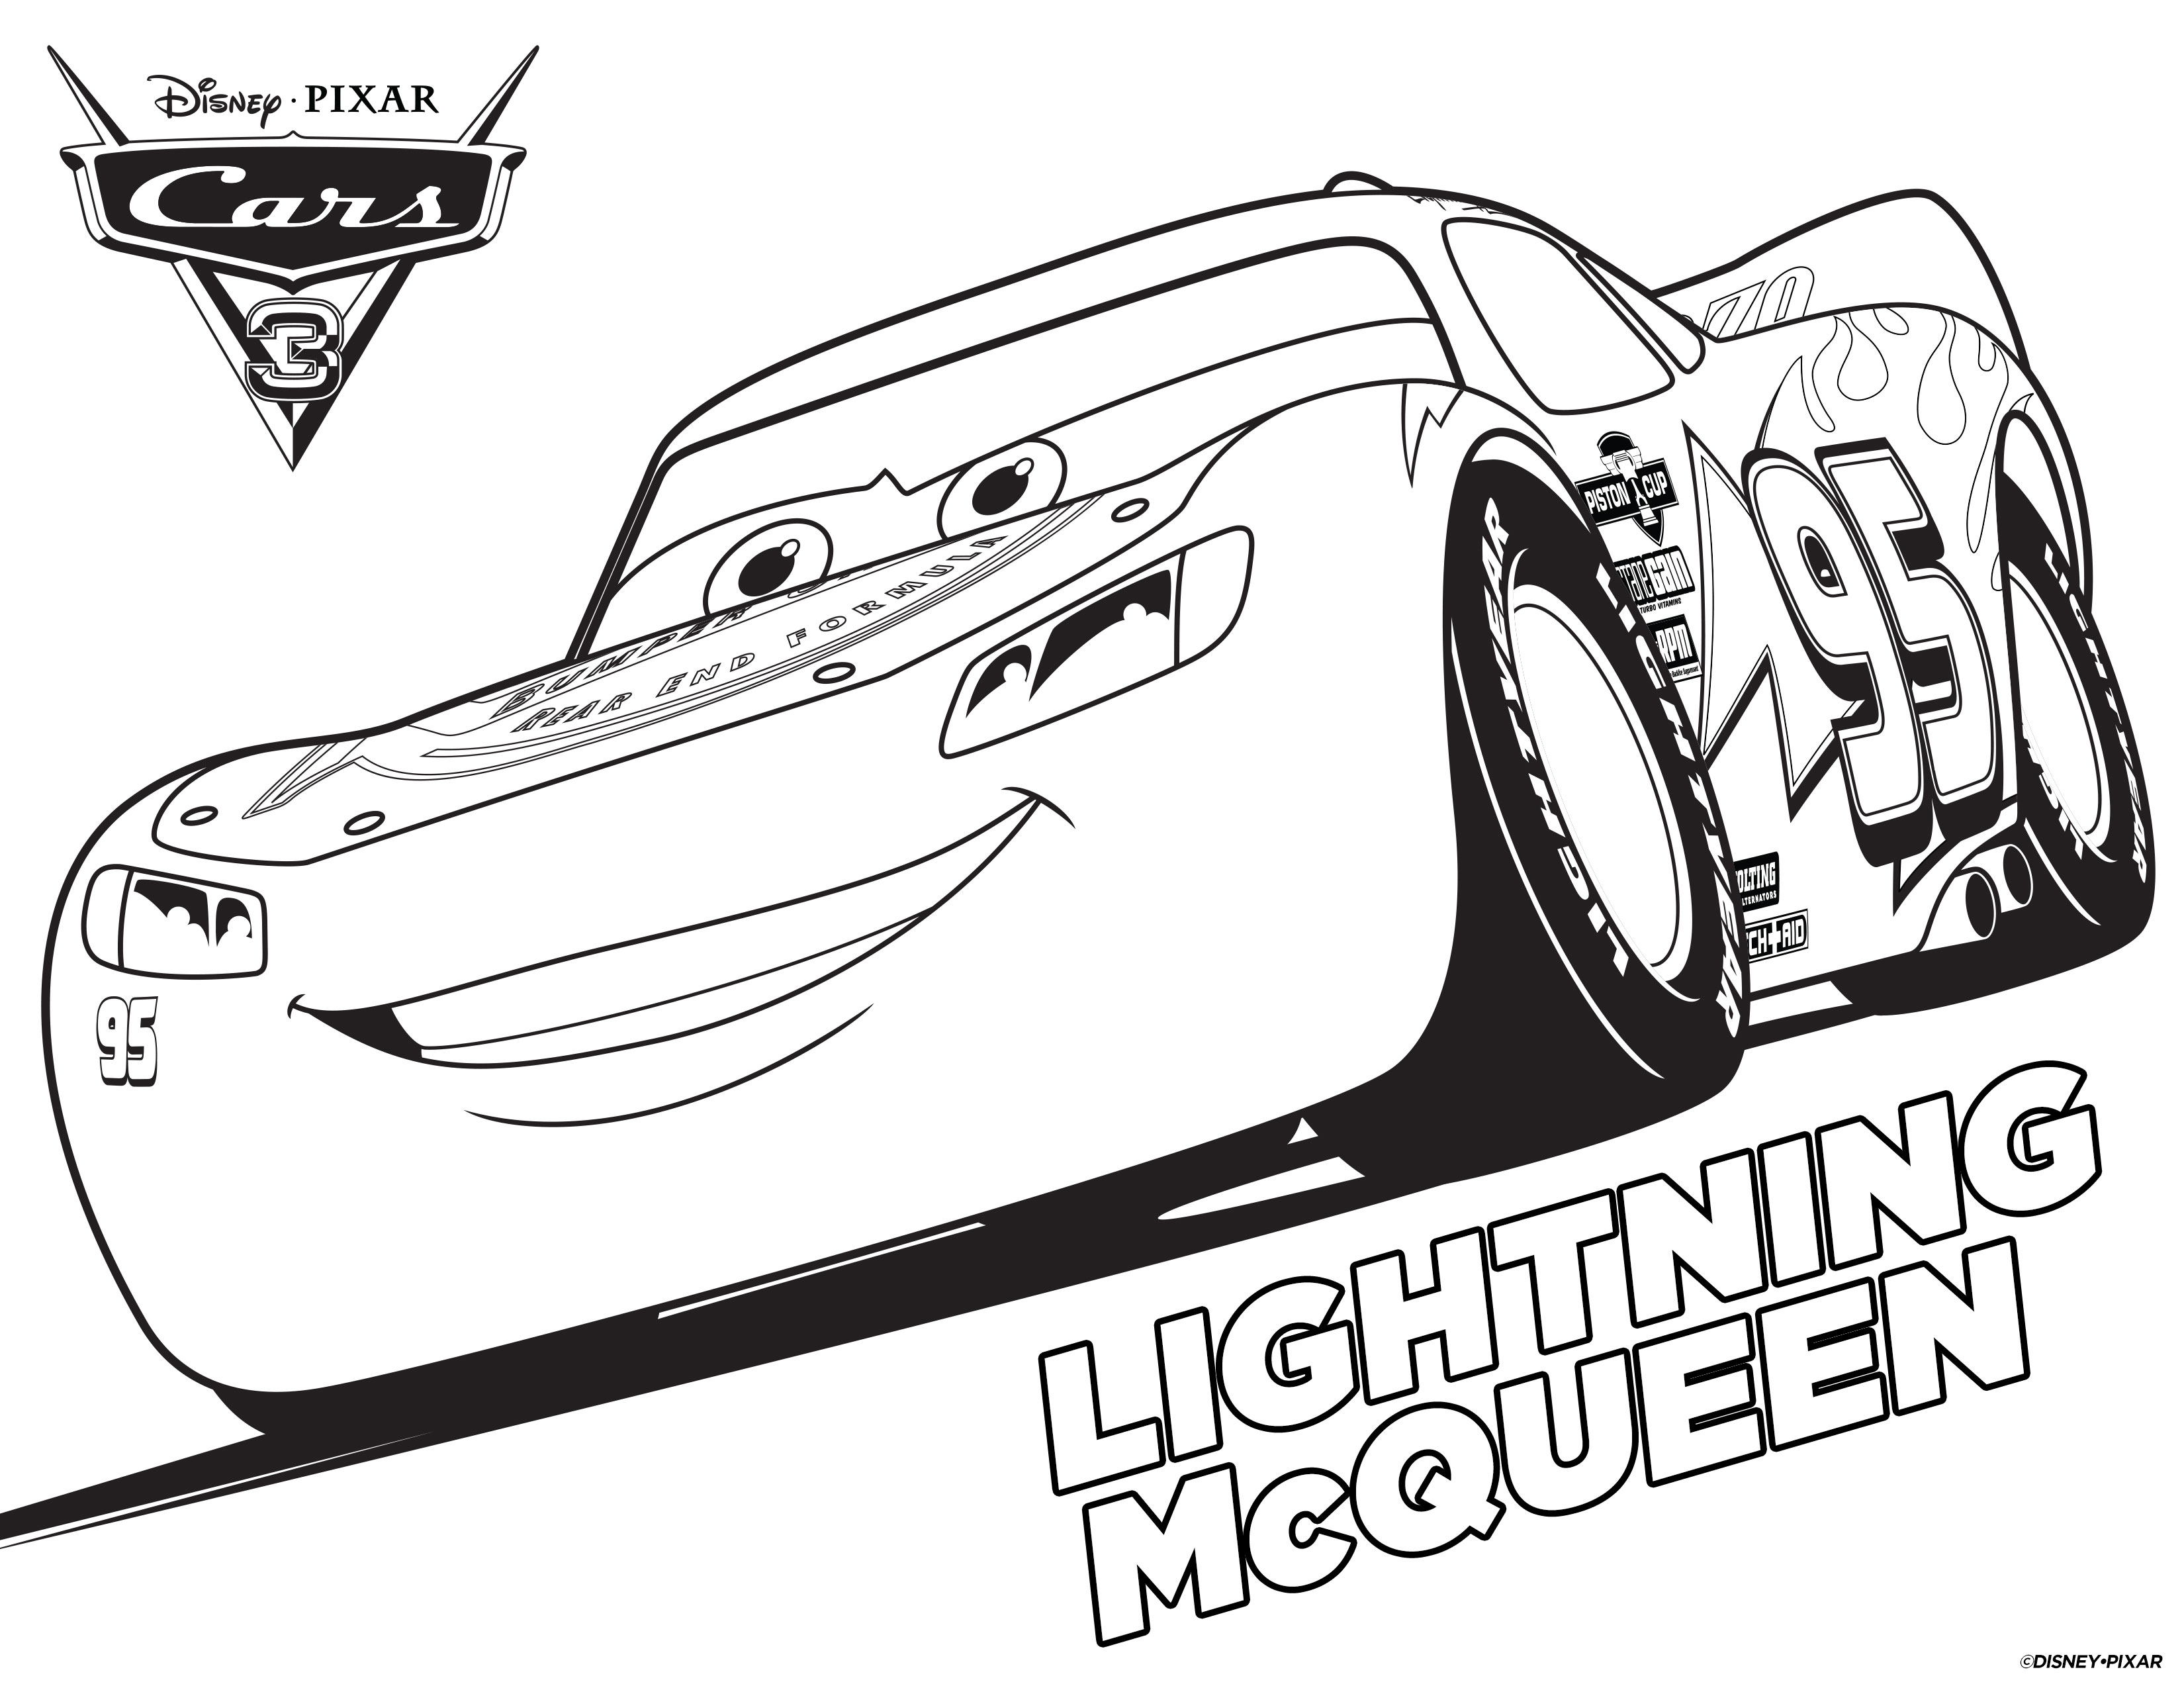 tow mater and lightning mcqueen coloring pages